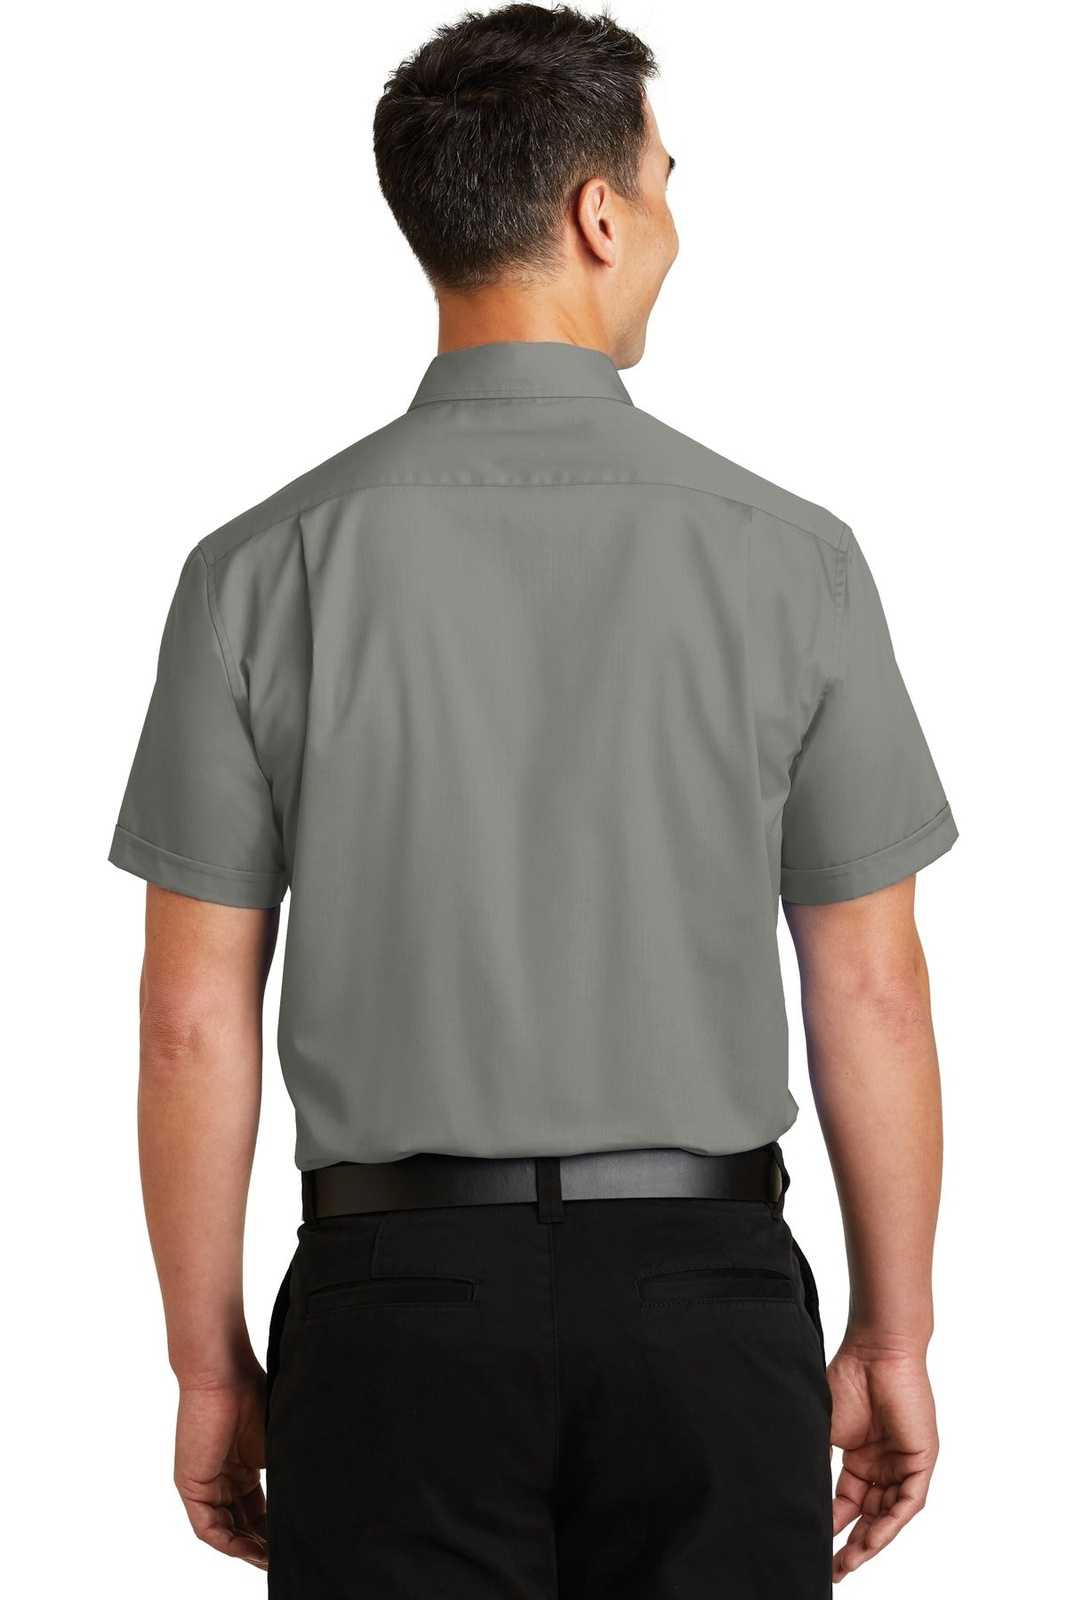 Port Authority S664 Short Sleeve SuperPro Twill Shirt - Monument Gray - HIT a Double - 2